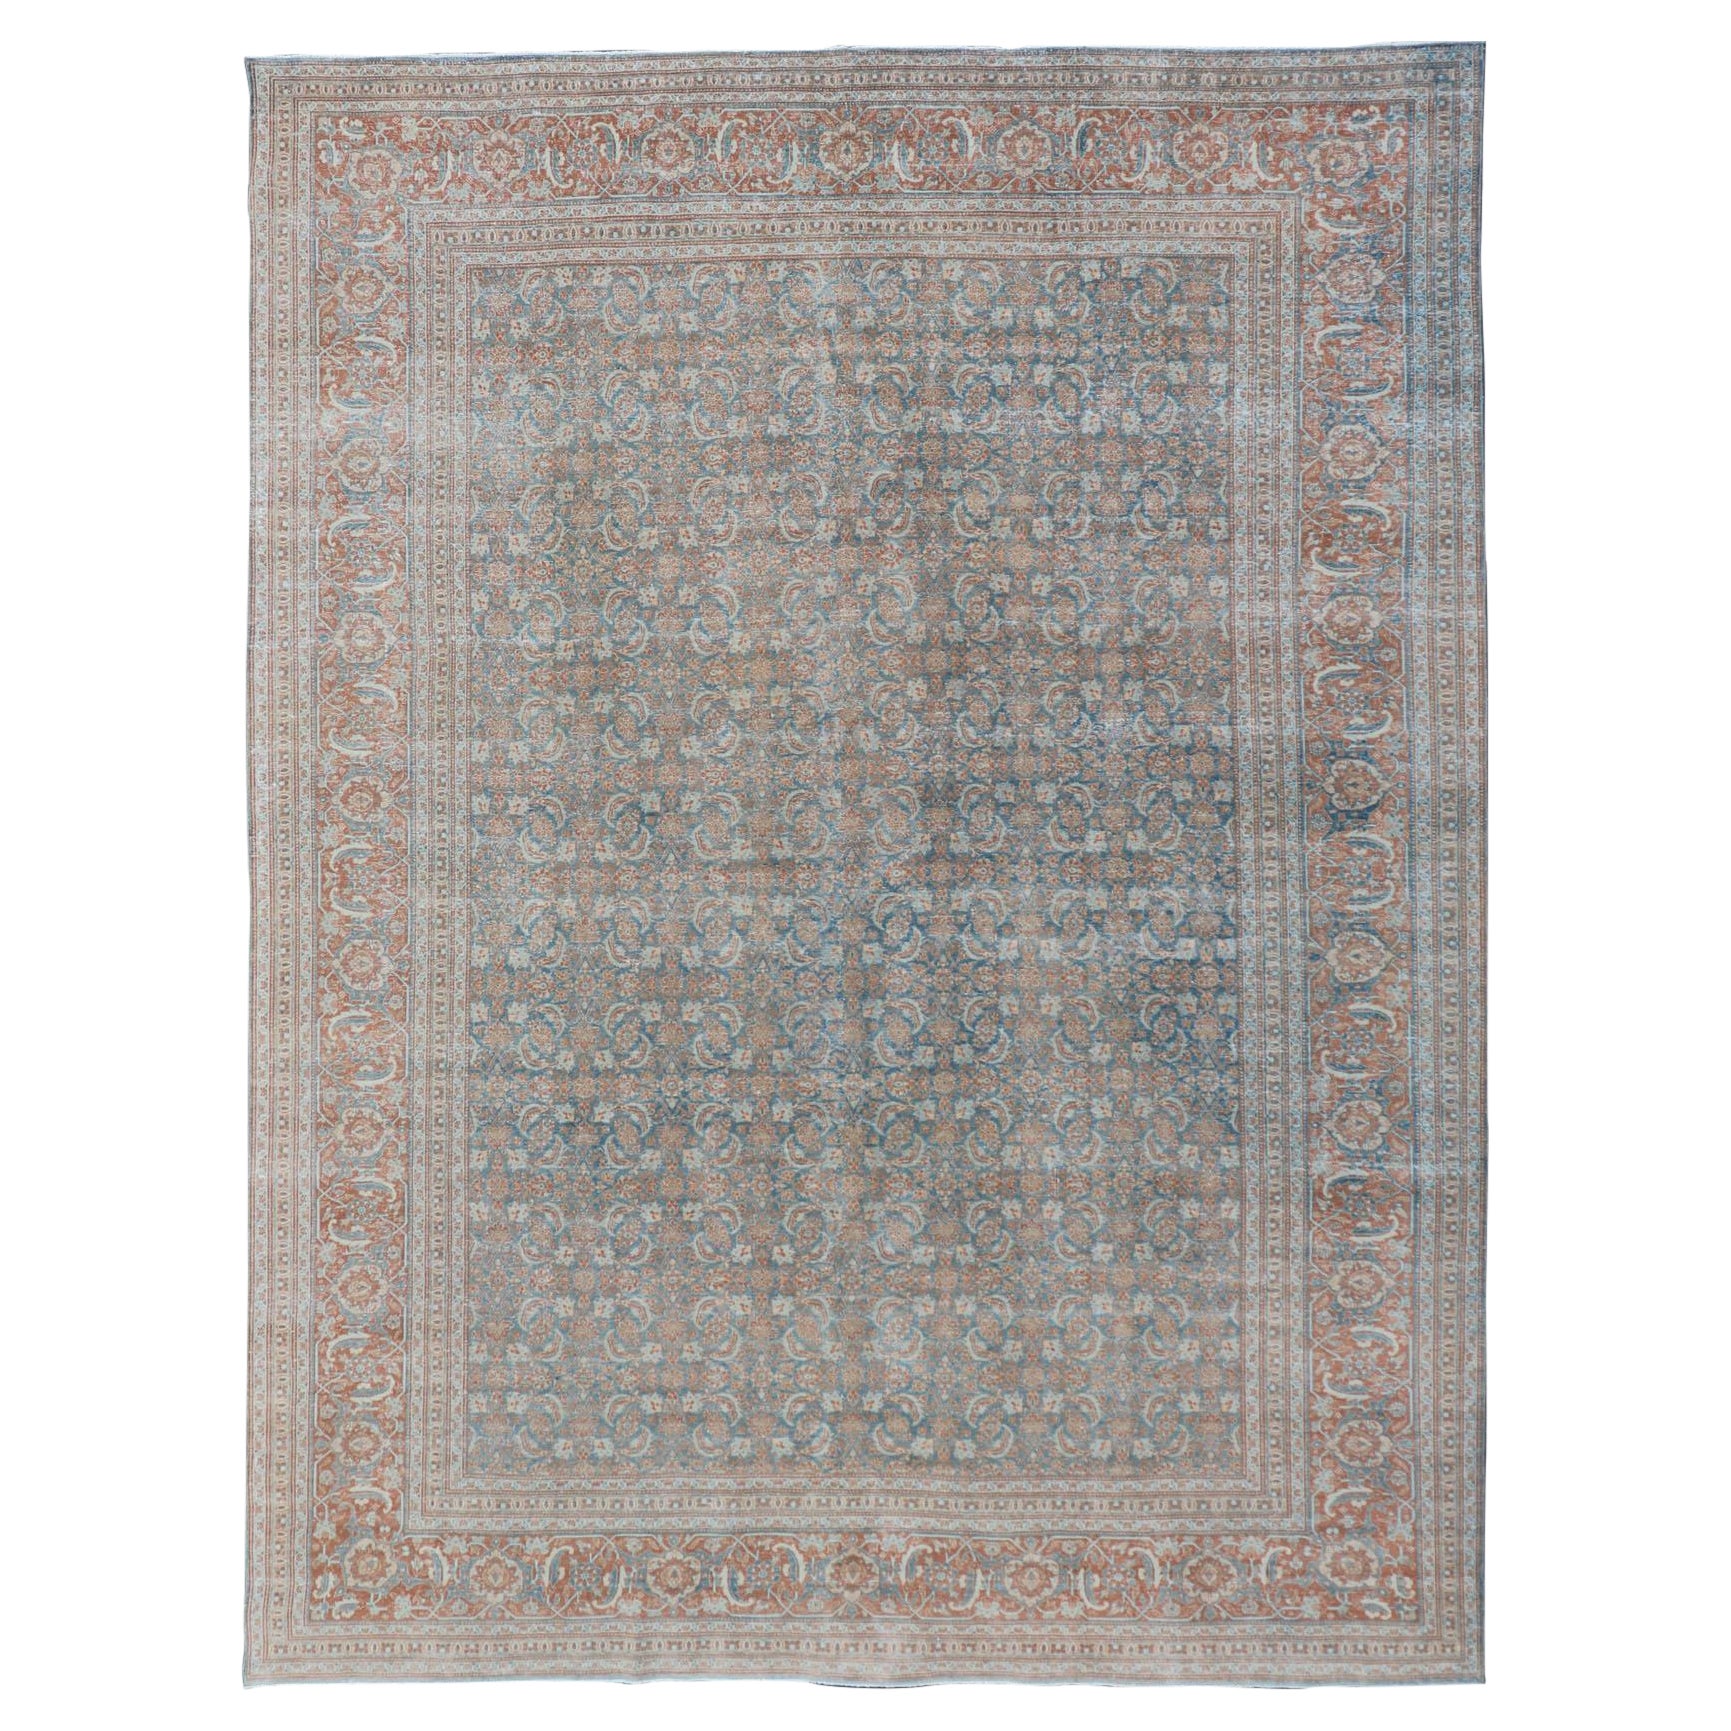 Large Antique Persian Tabriz Carpet with Herati Design in Gray Blue & Orange Red For Sale